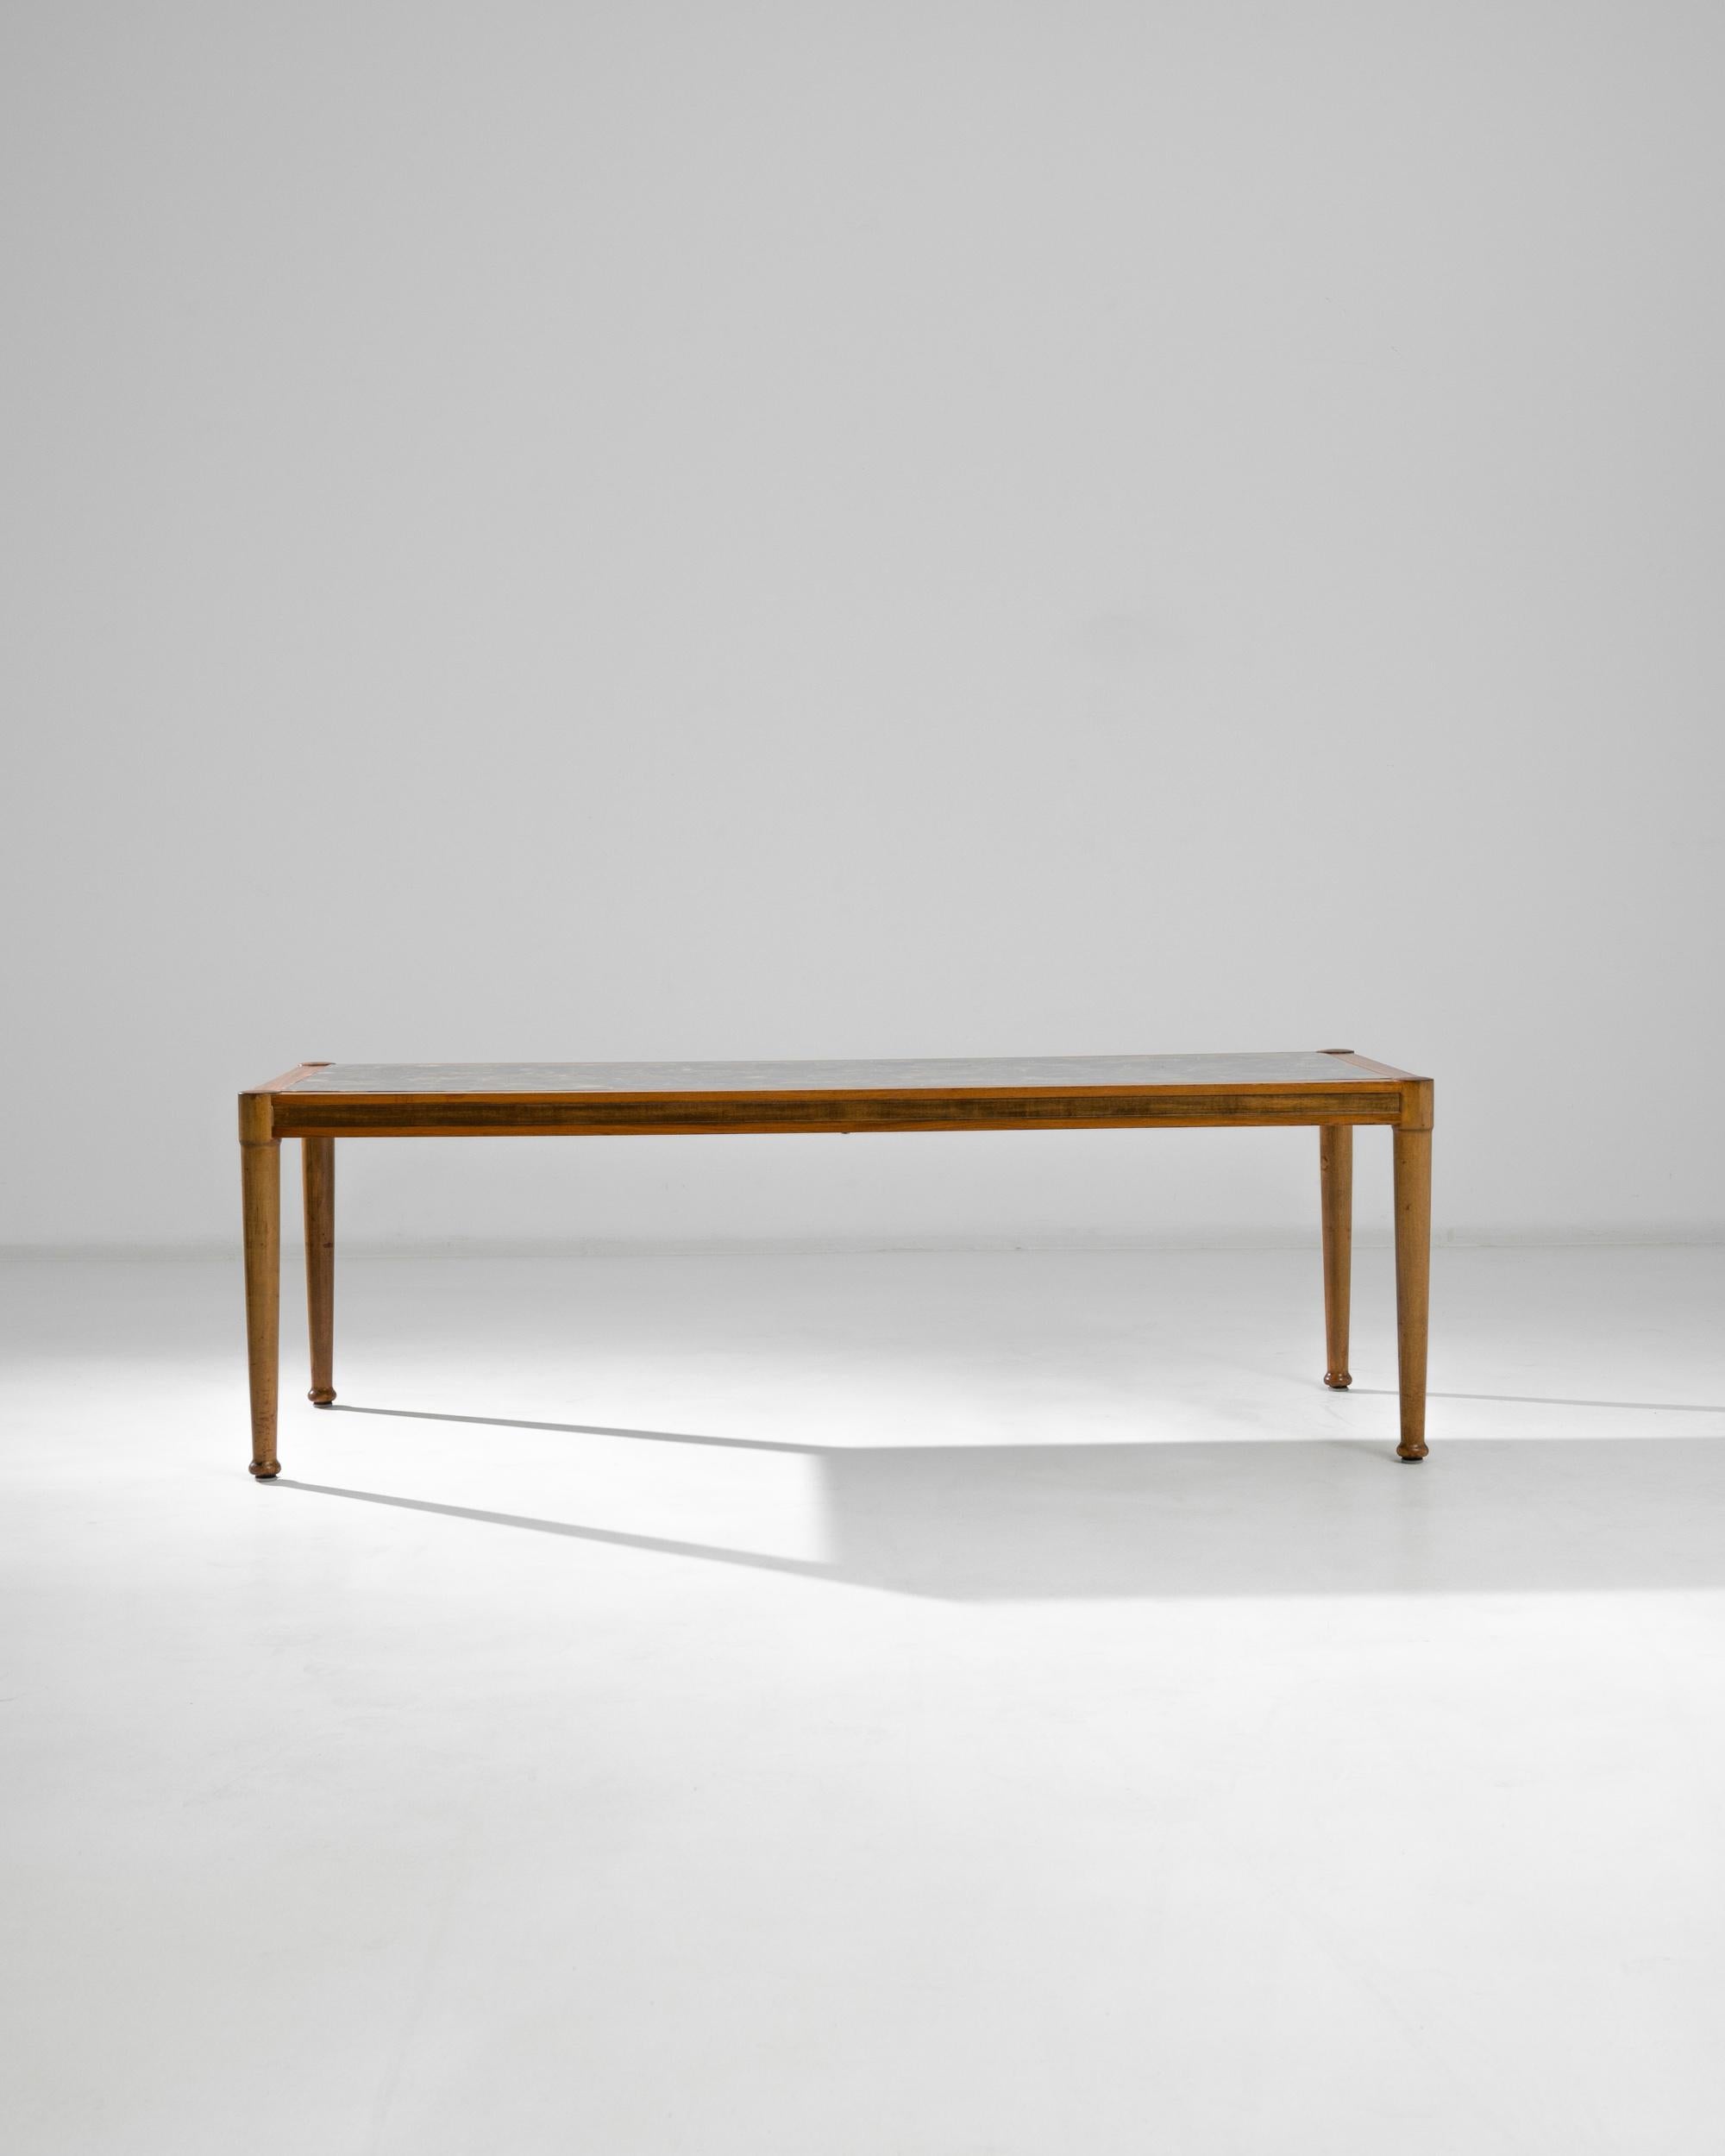 A wooden coffee table with an epoxy top from Denmark, produced circa 1960. The slim profile and clean lines on this low-slung coffee table give it a light, airy feeling, that belies the actual heft of the piece. The clear top allows light to freely